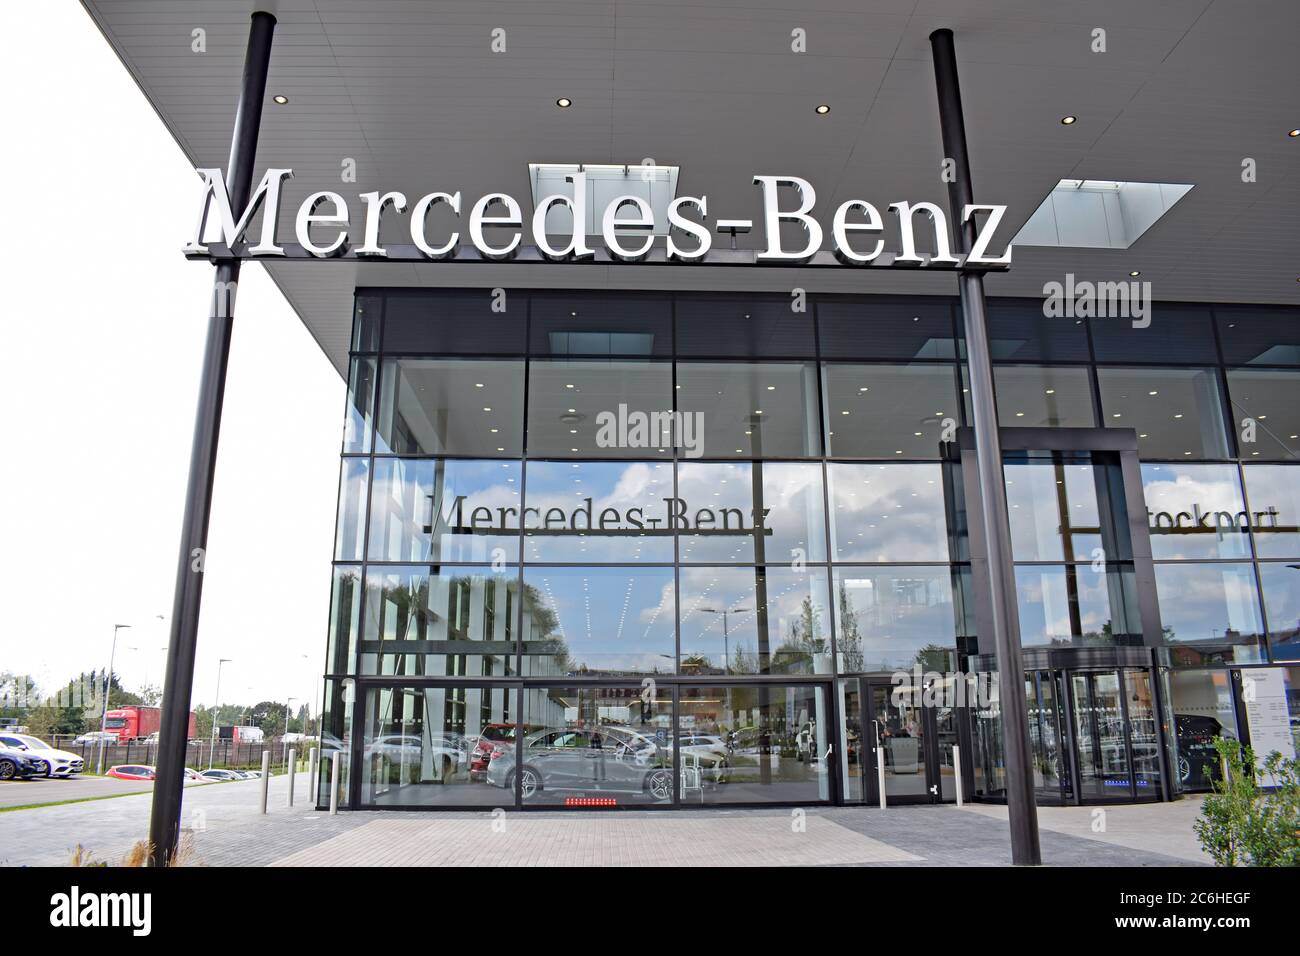 Large Mercedes Benz car dealership Stockport, UK opened July 29, 2019. Detail of front with reflections in glass Stock Photo